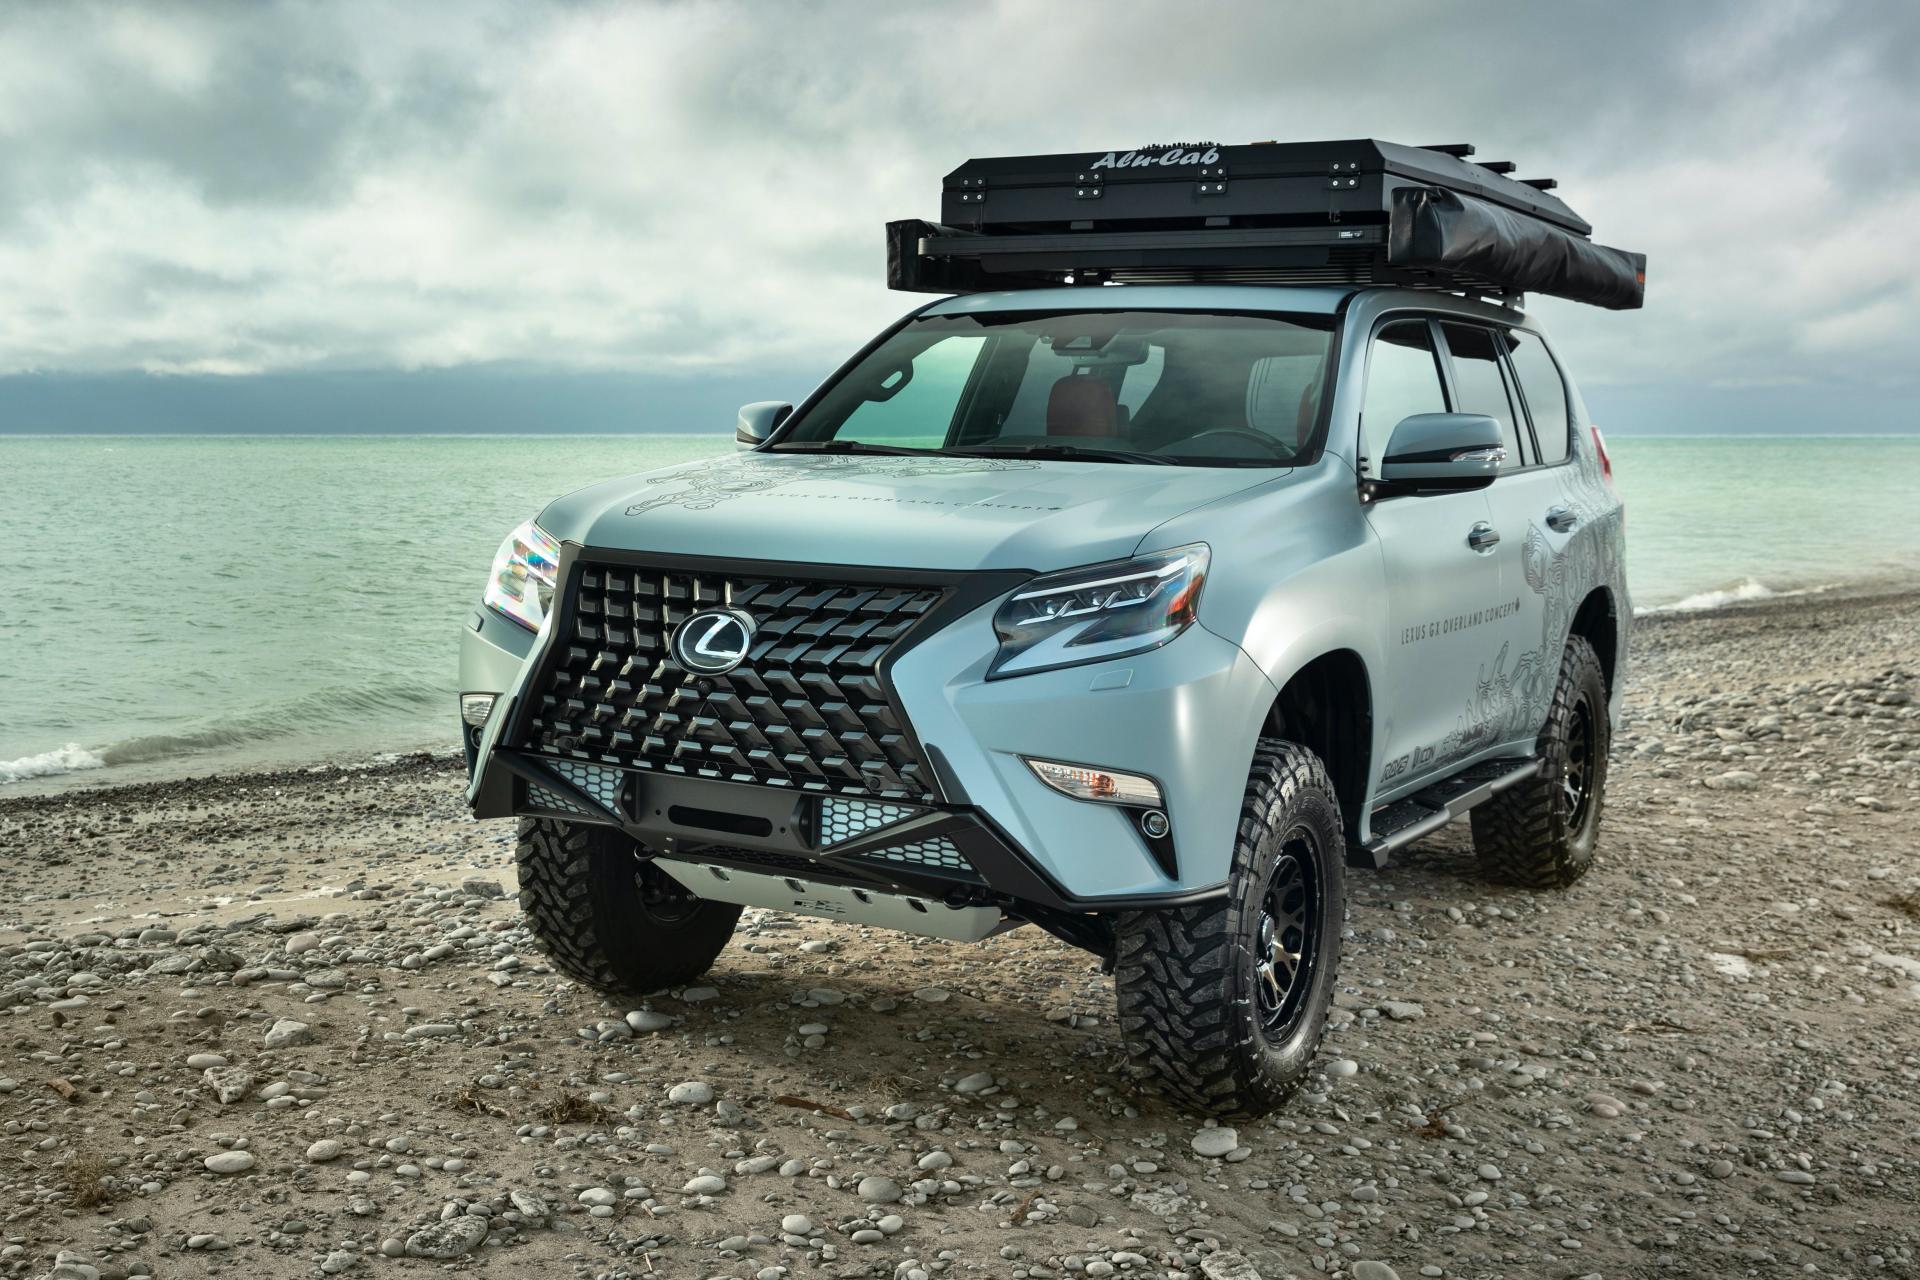 New Lexus GX Overland Concept Is The Perfect SUV To Take You Off-Grid